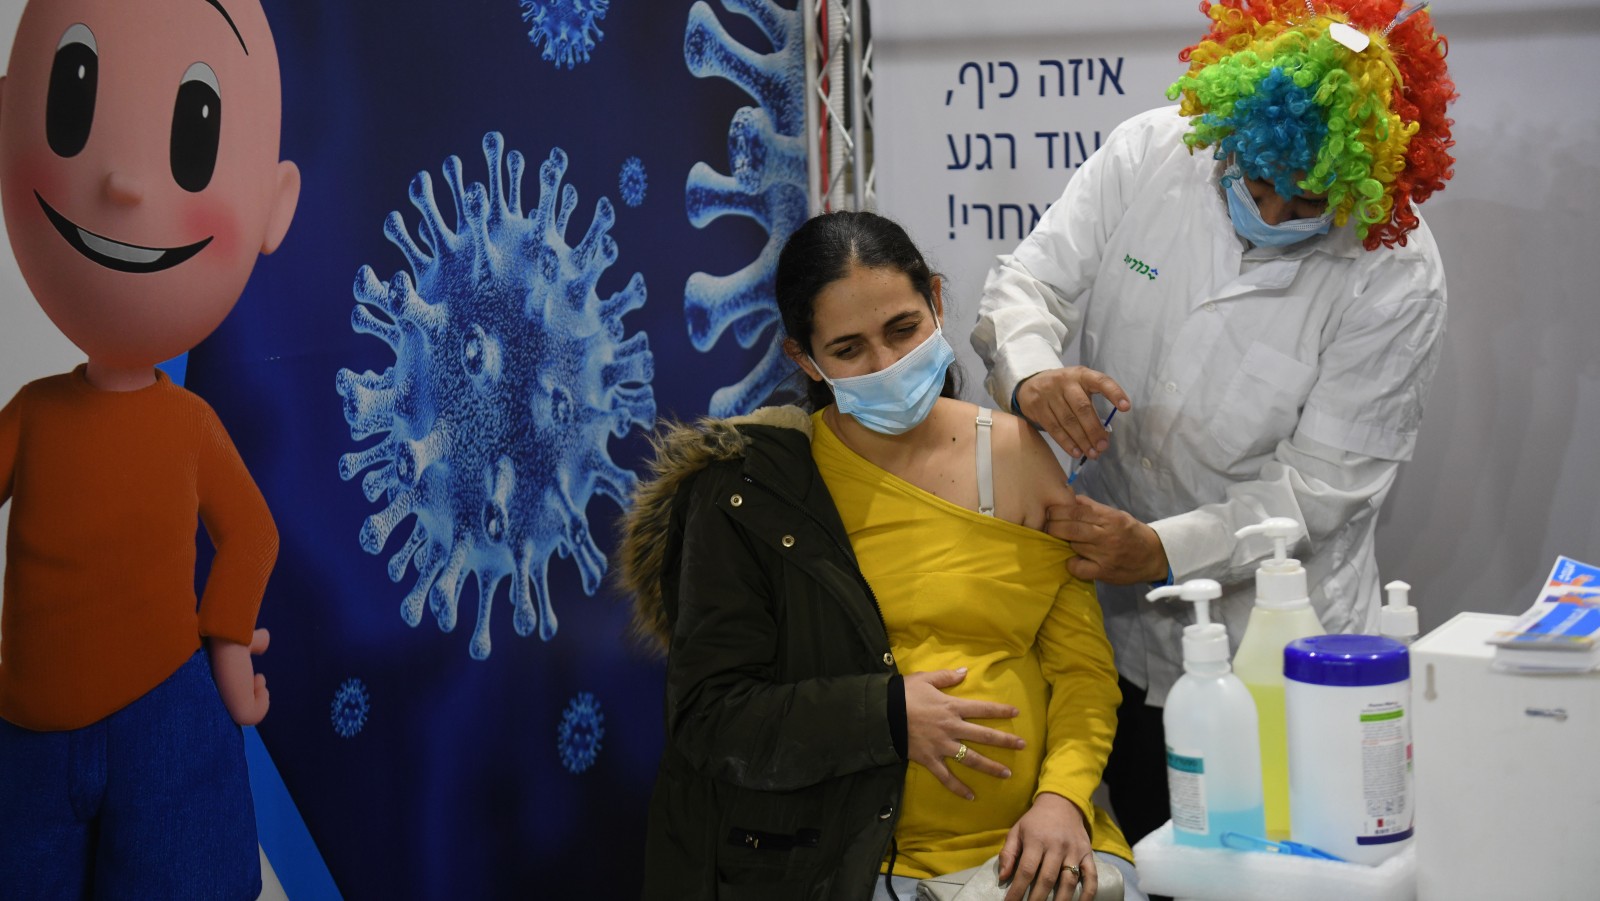 A pregnant woman receives a Covid-19 vaccine injection in Or Yehuda, February 25, 2021. Photo by Flash90